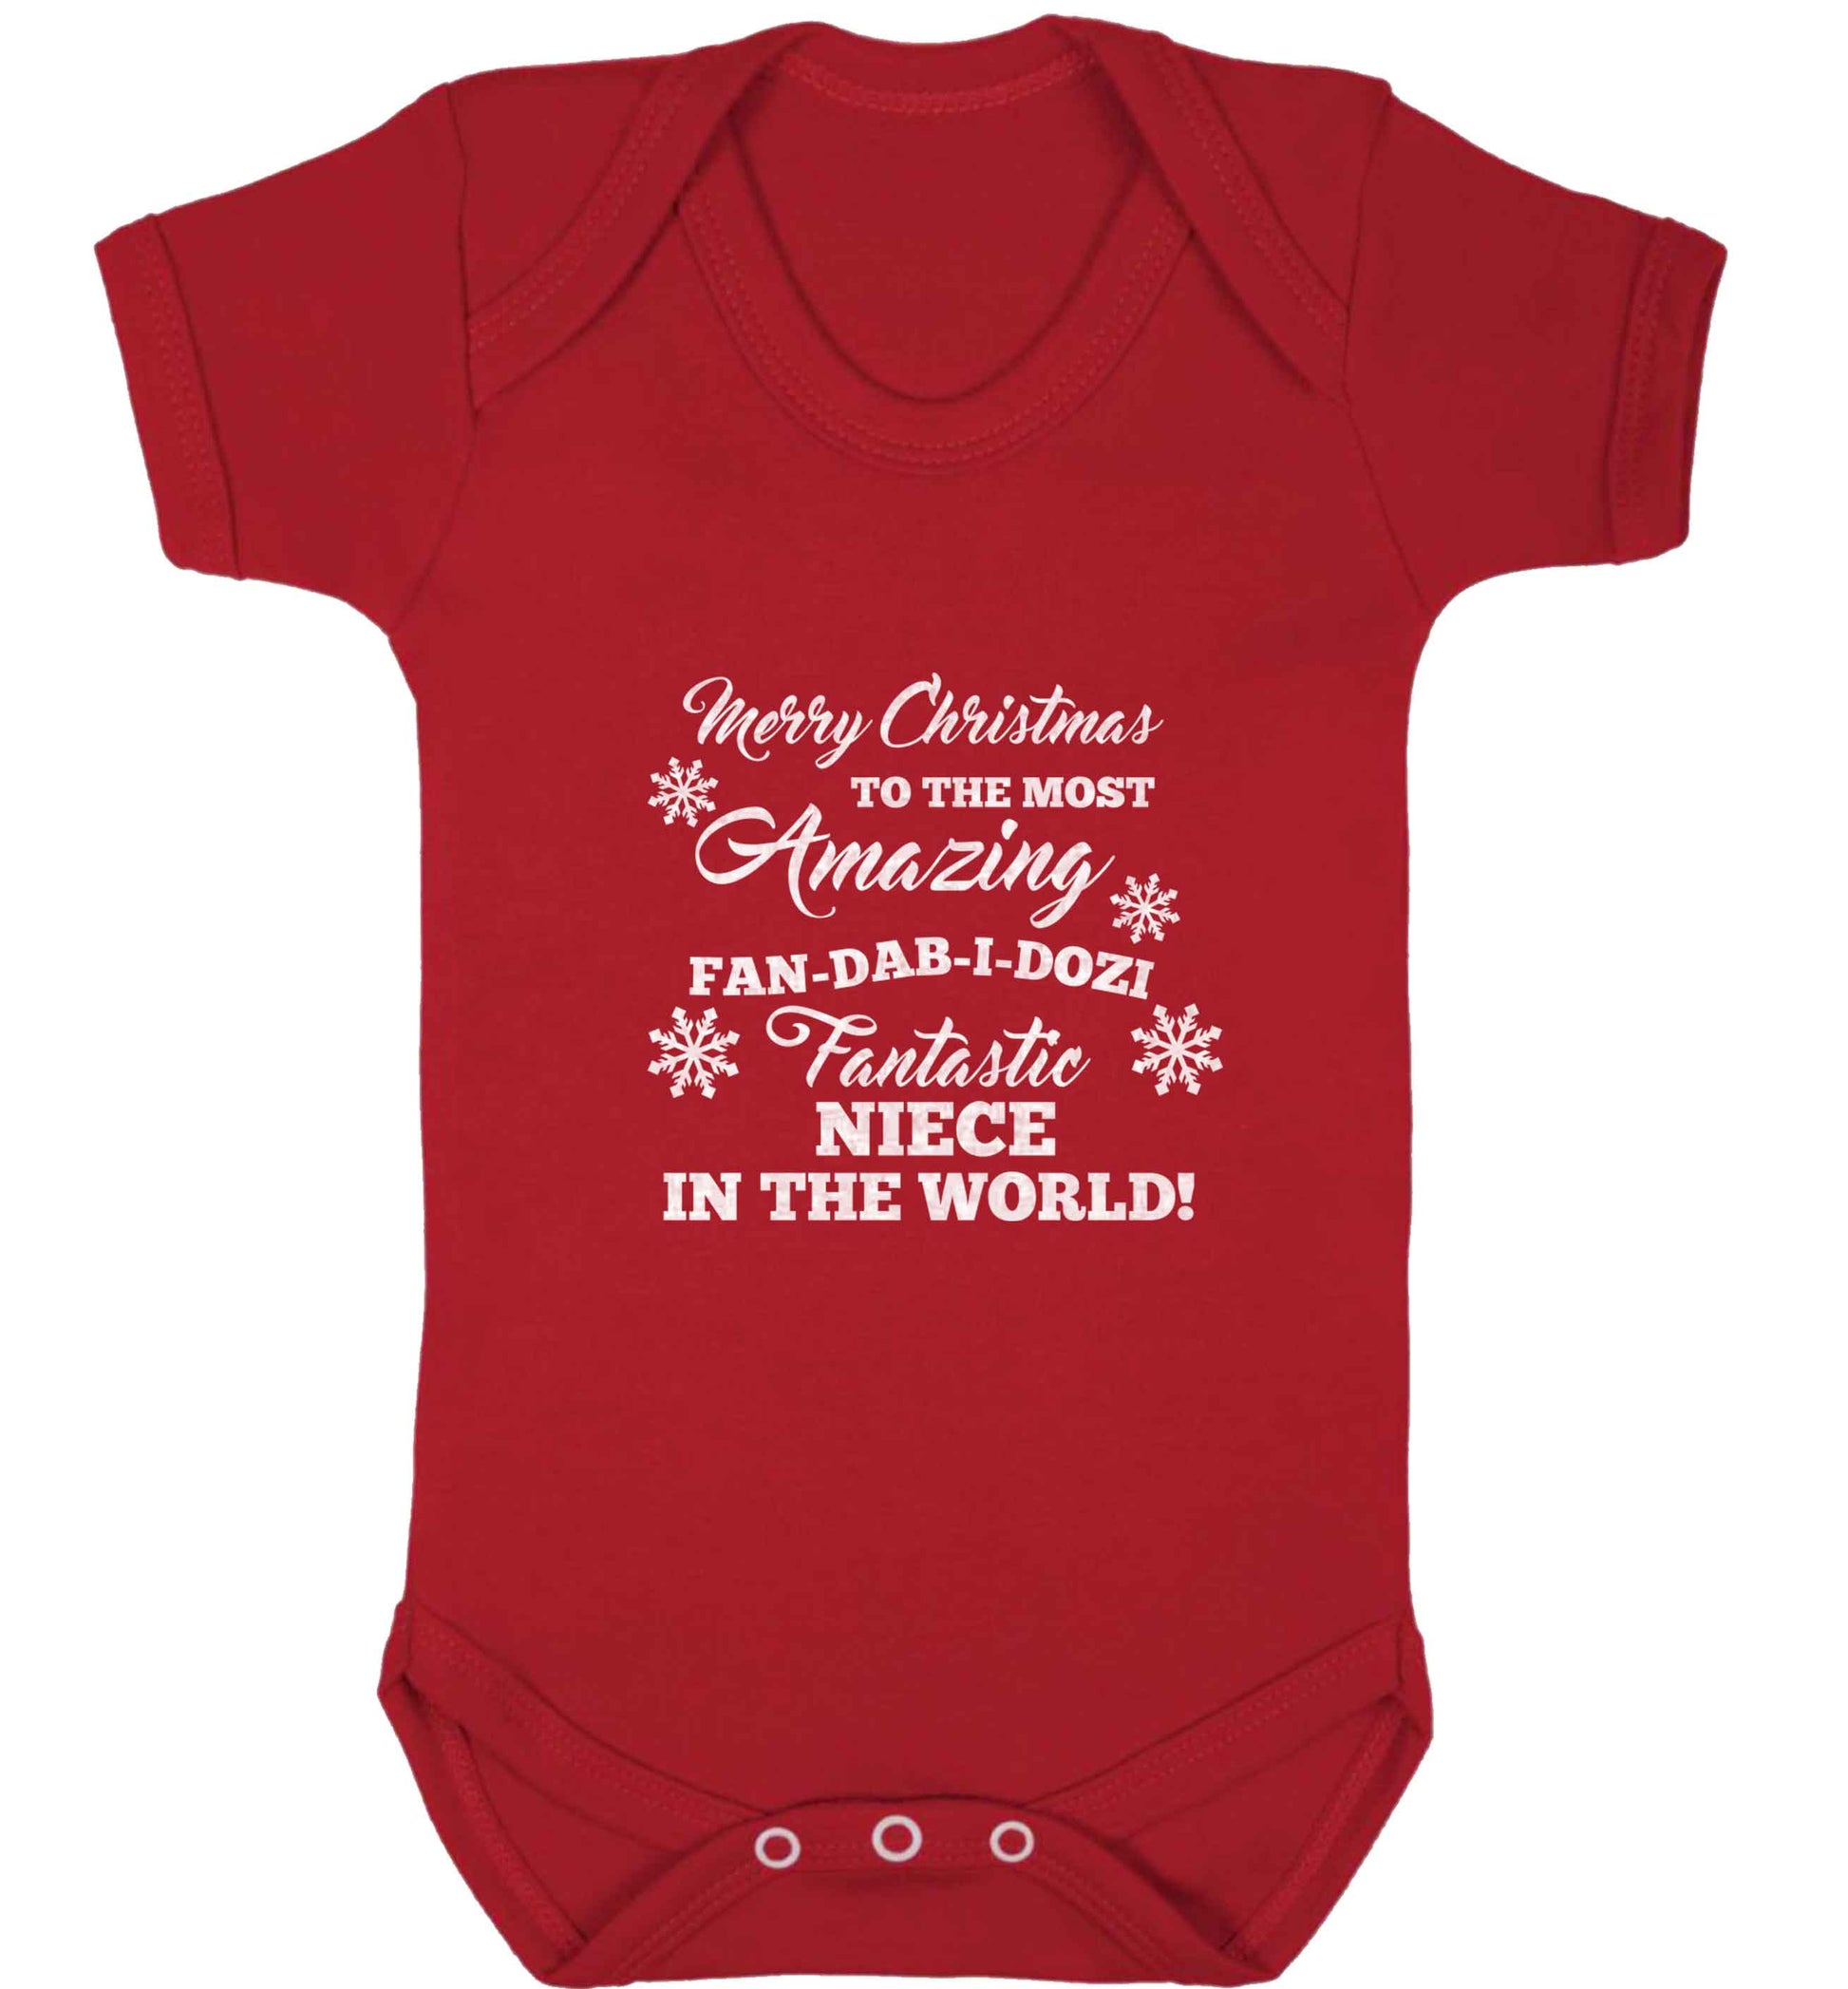 Merry Christmas to the most amazing fan-dab-i-dozi fantasic Niece in the world baby vest red 18-24 months